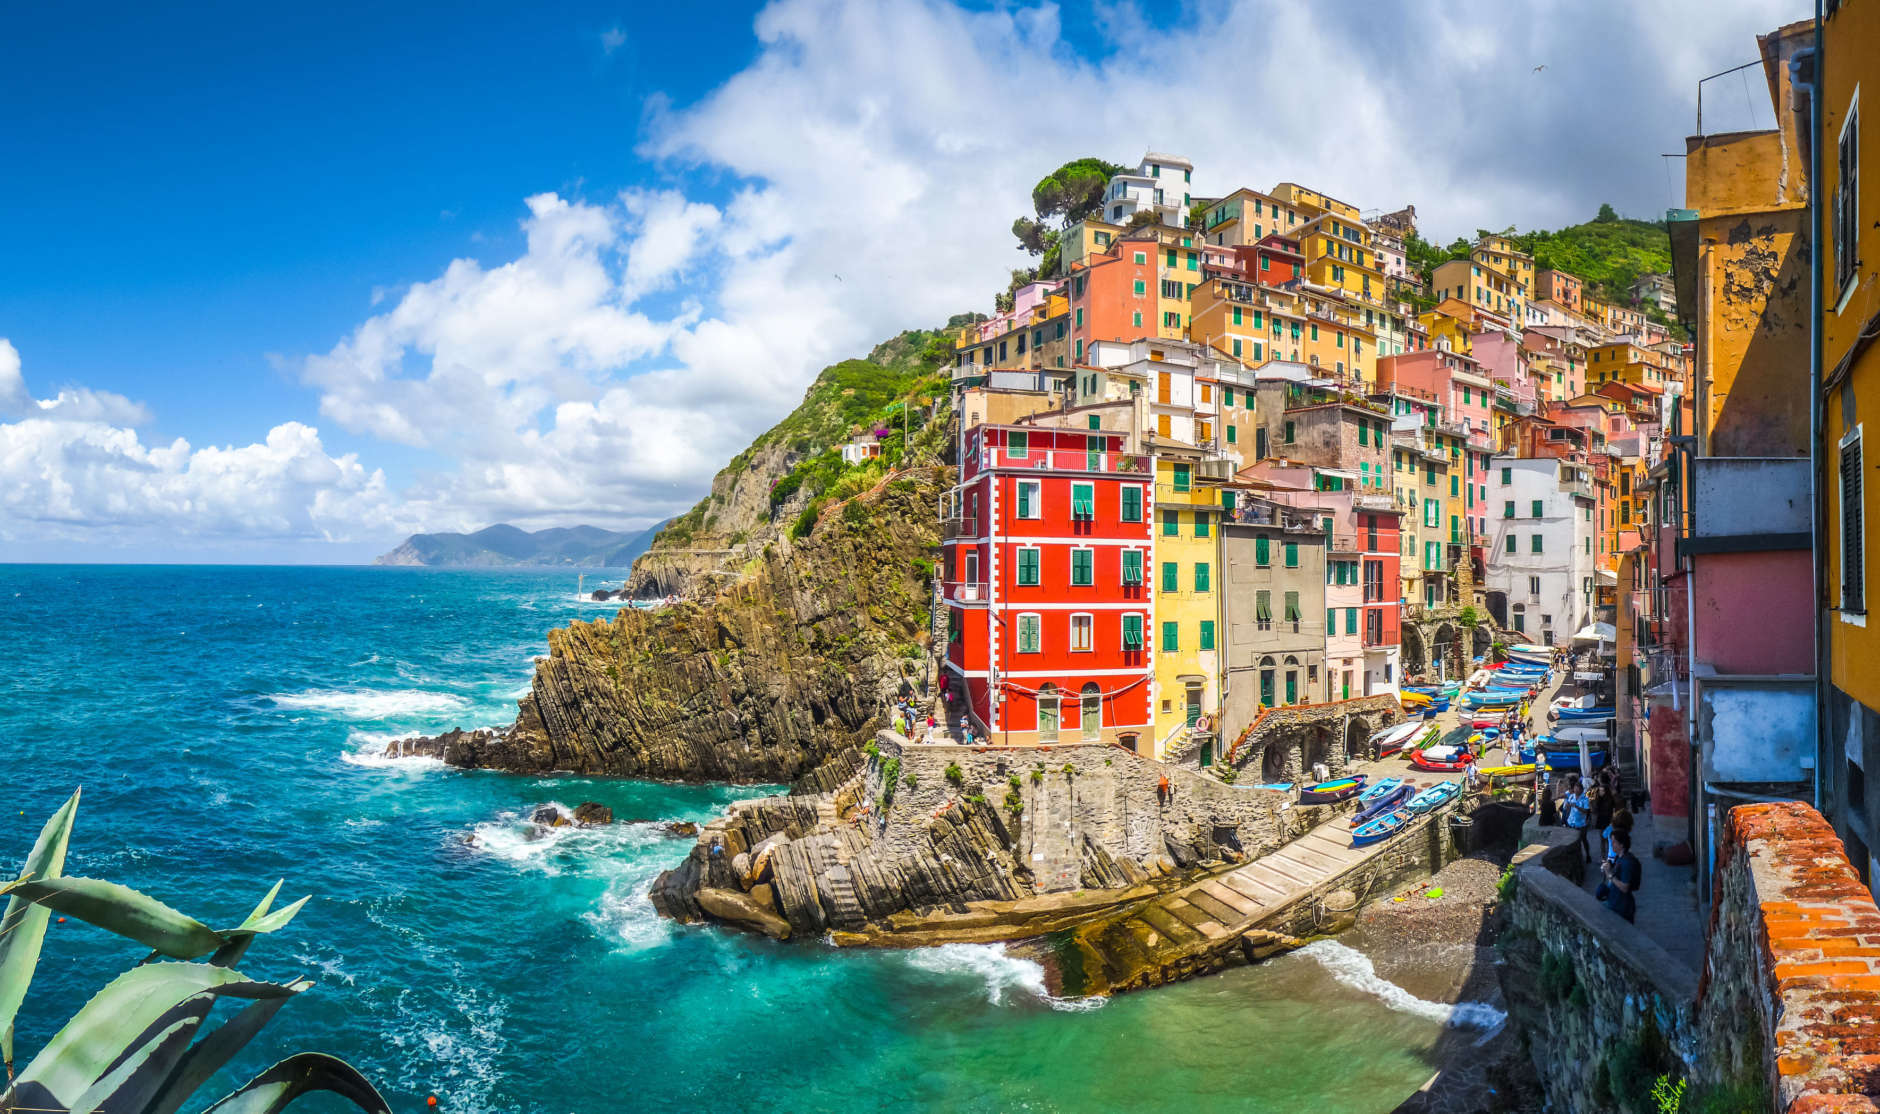 Panoramic view of Riomaggiore, one of the five famous fisherman villages of Cinque Terre in Liguria, Italy